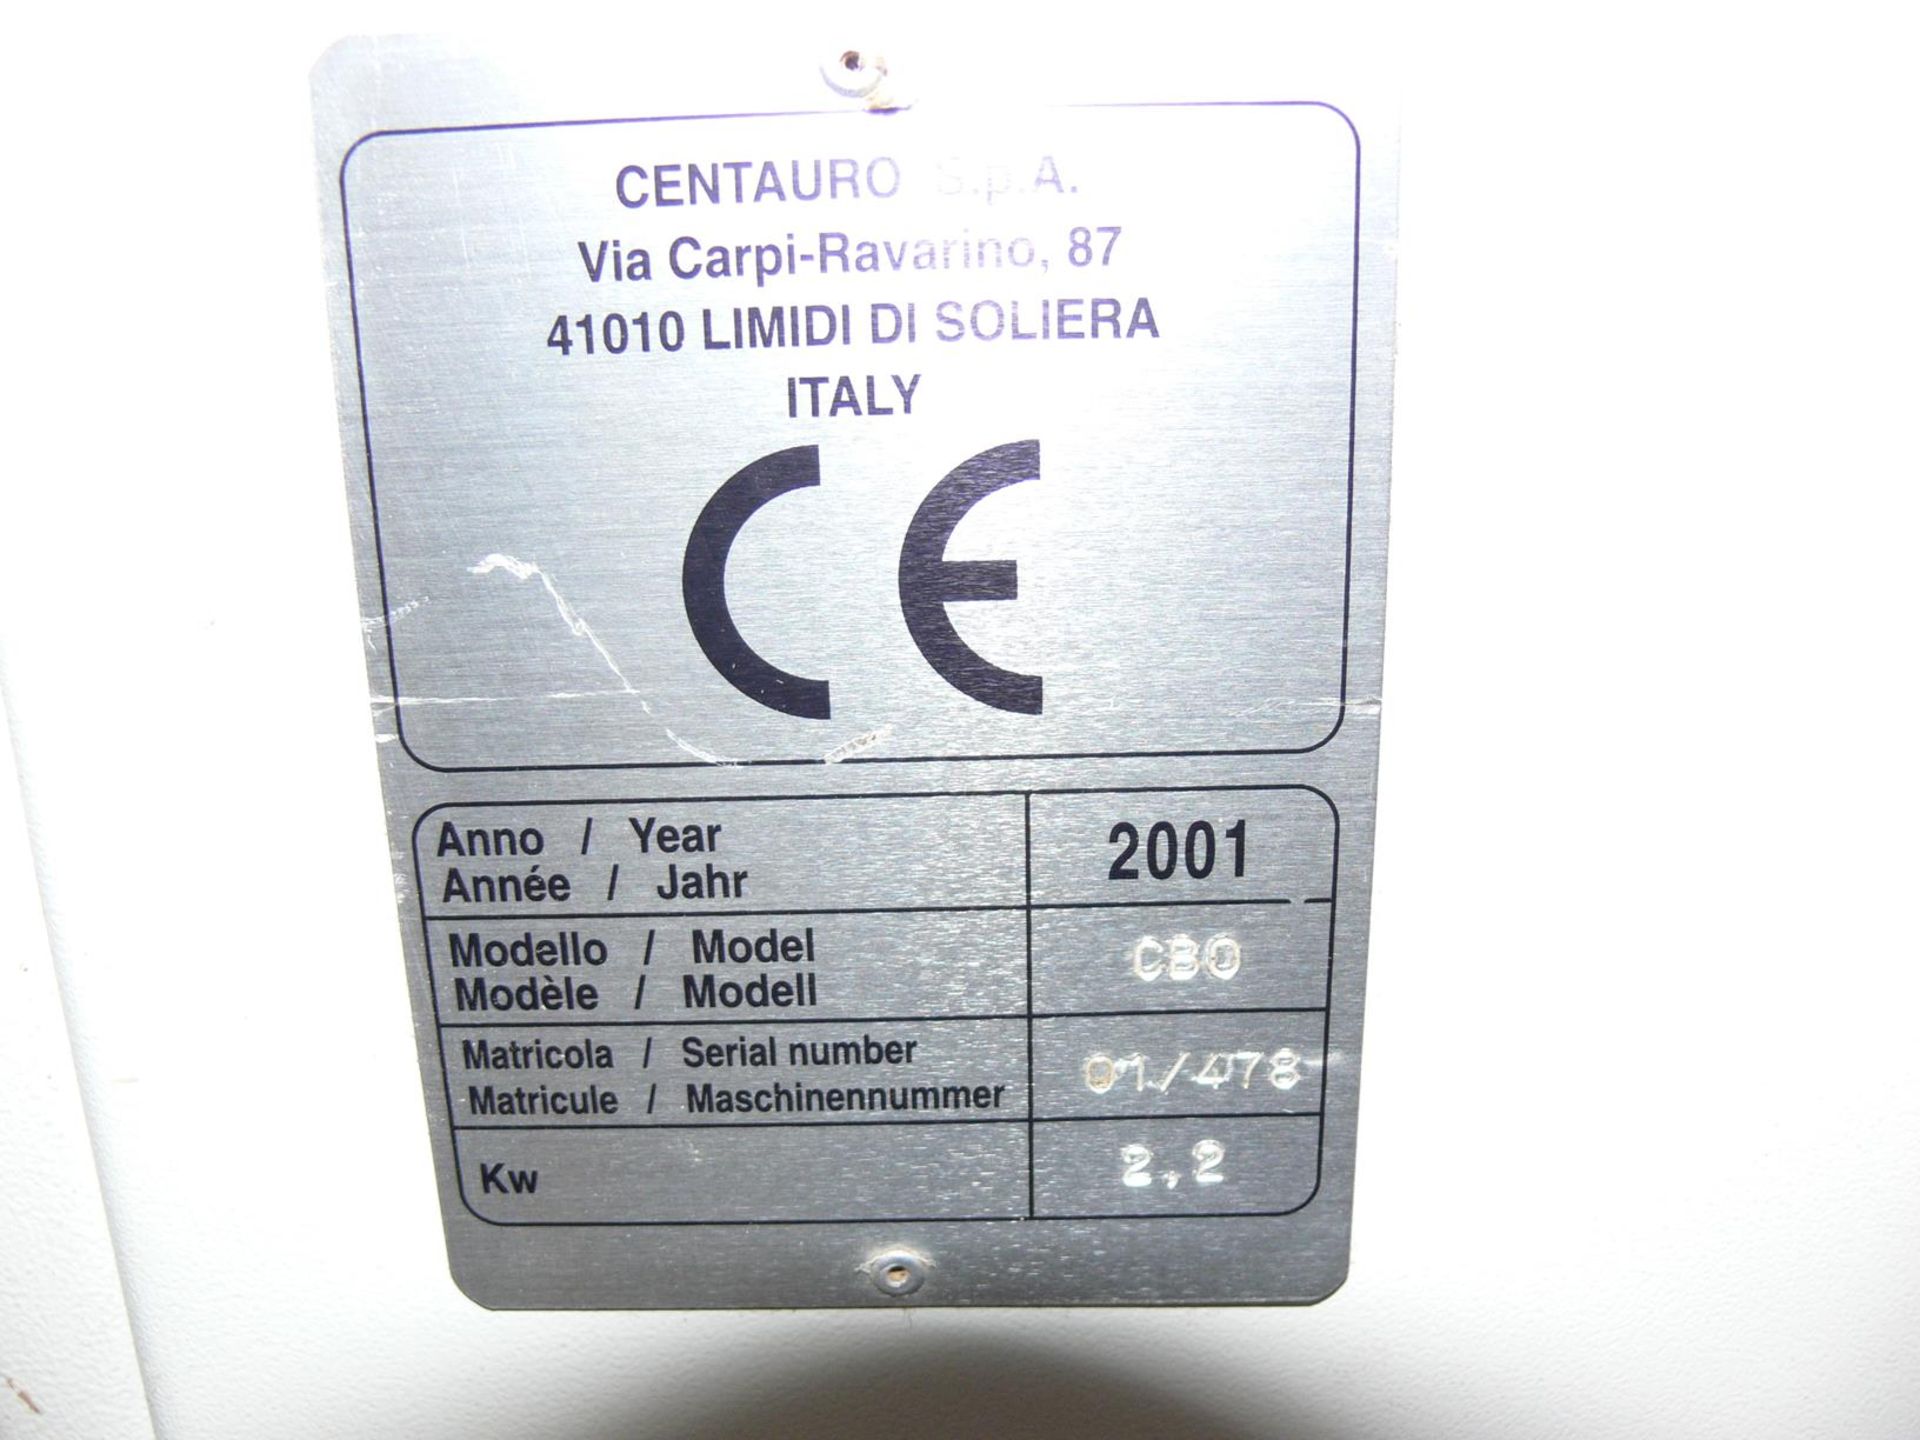 * Centauro CBO Chain Chisel Morticer, YOM:2001, S/N: 01/478, 3PH. Please note there is a £5 + VAT - Image 3 of 5